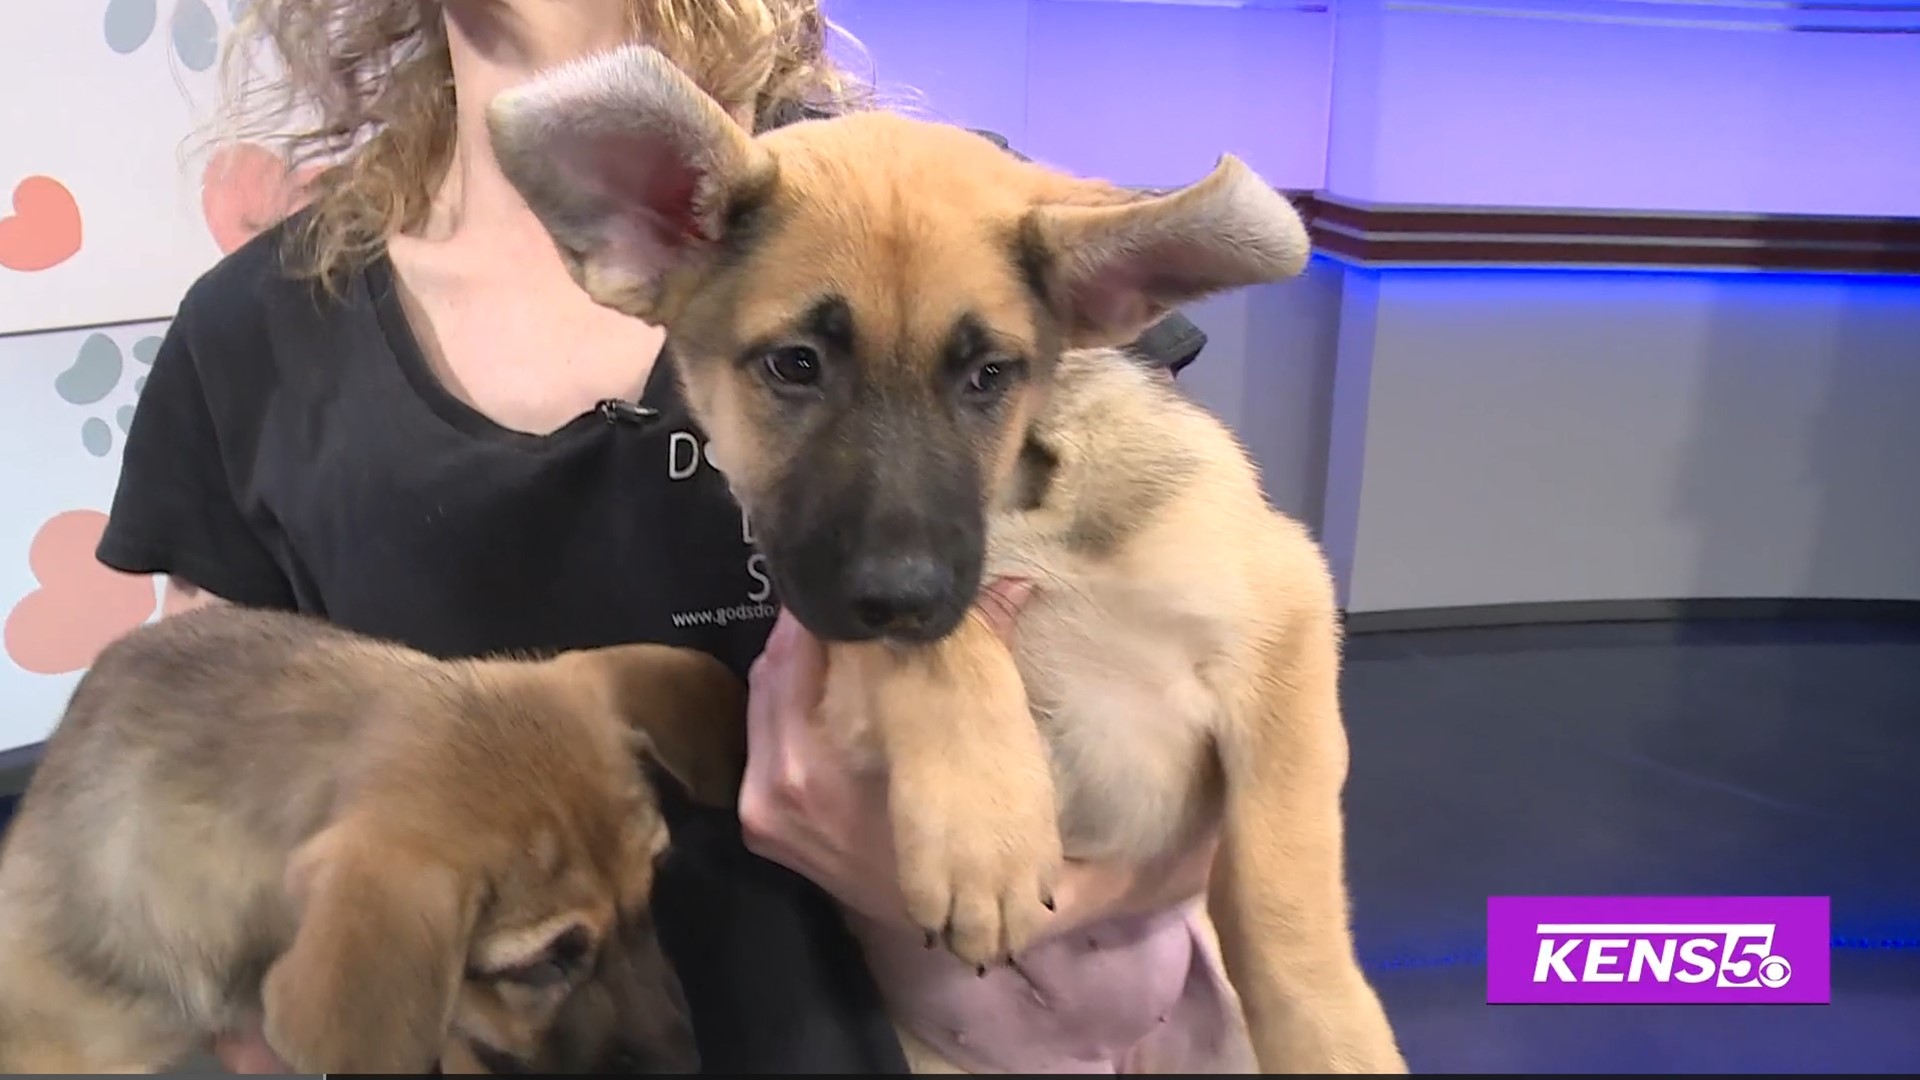 Amy Luginbill with God's Dogs Rescue brings in a couple of puppies that a ready to find their fur-ever homes.